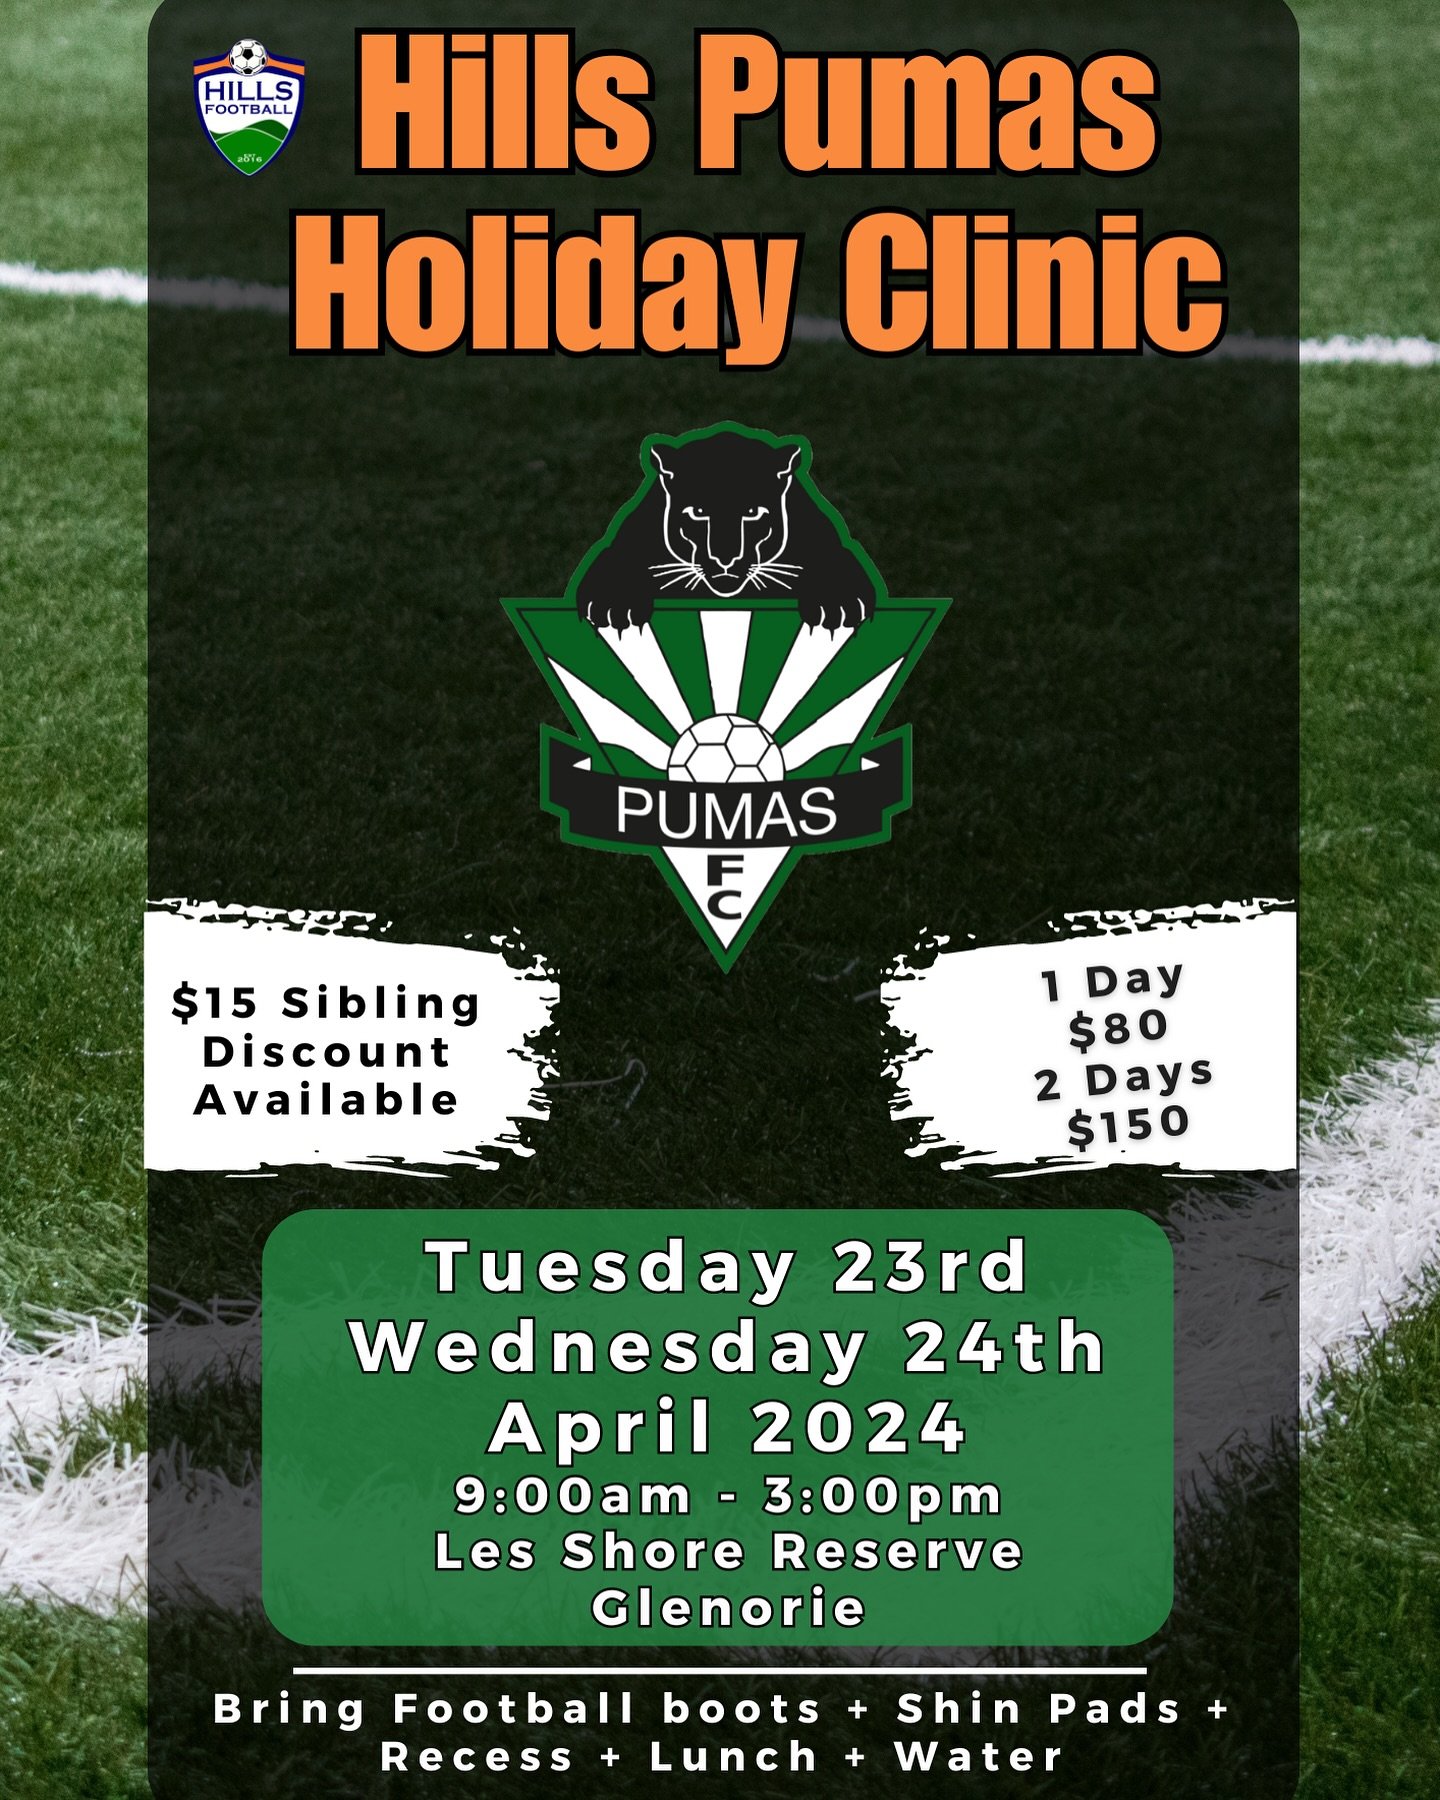 Friendly reminder for those attending Tuesday 23rd &amp; Wednesday 24th April Holiday Clinic 

Please bring:

💧 2 x Bottle of water
🌯 Recess &amp; Lunch
🧢 Hat &amp; Suncreen
⚽️ Football Boots &amp; Shin Pads

Arrive: 8:45am for a 9am Kick-off 

We